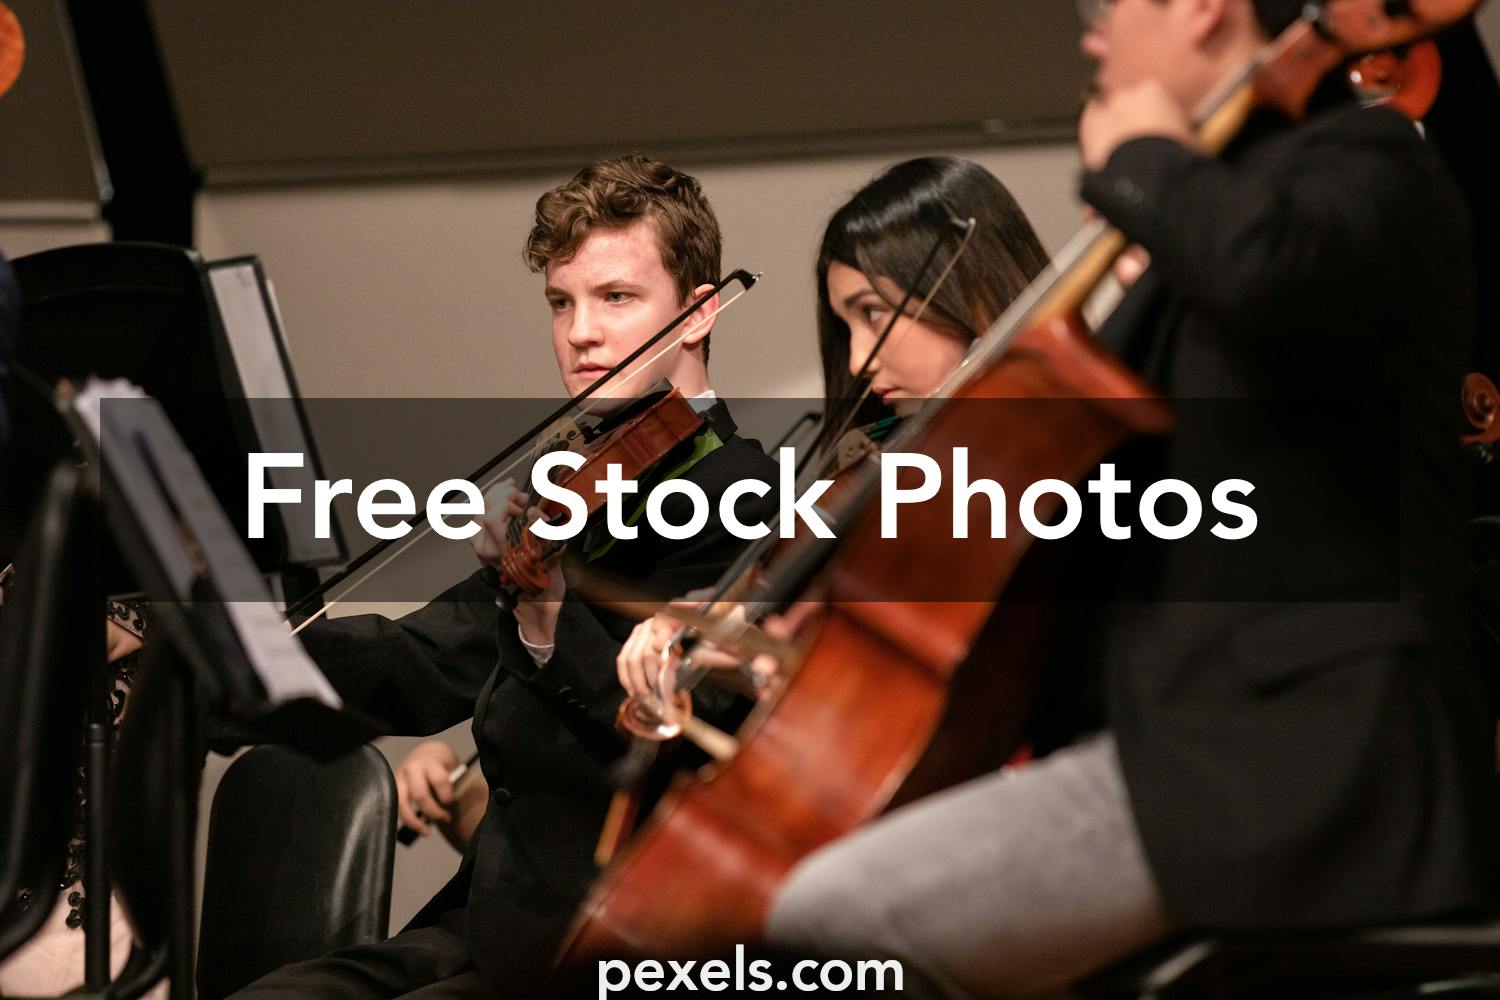 High School Band Instruments Photos, Download The BEST Free High School ...